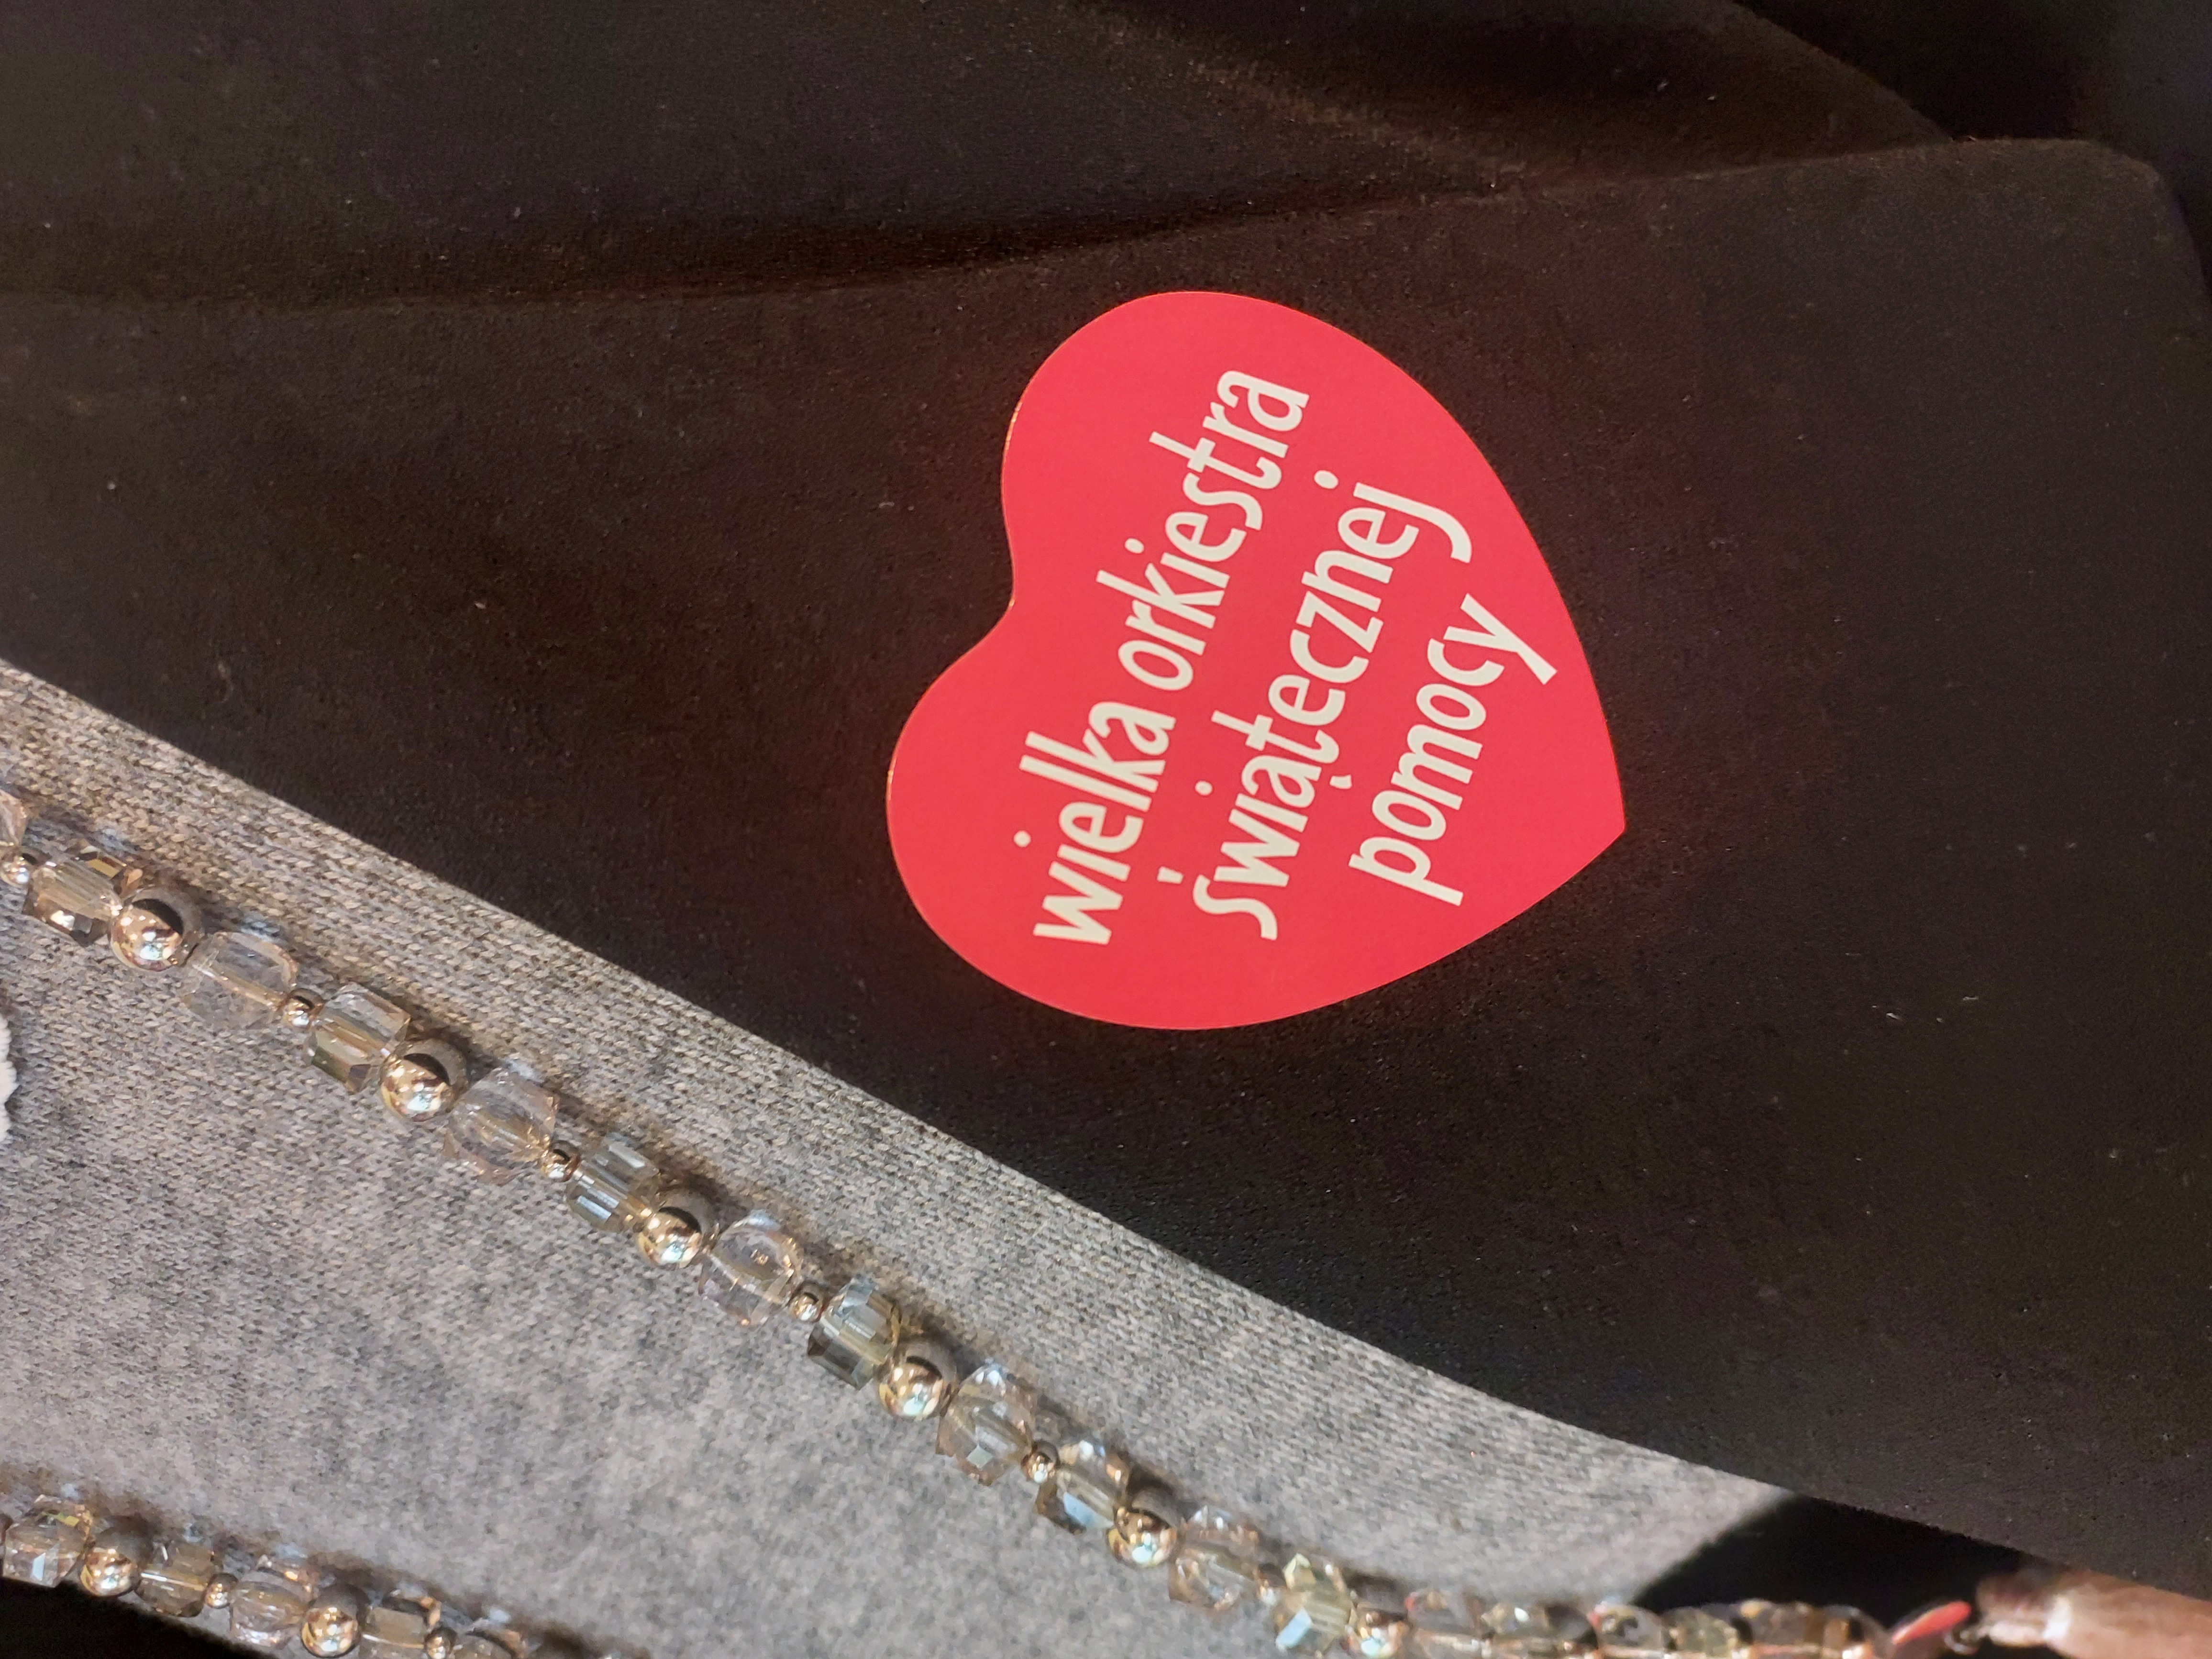 Red heart - sticker, given to the person who threw a donation into the can